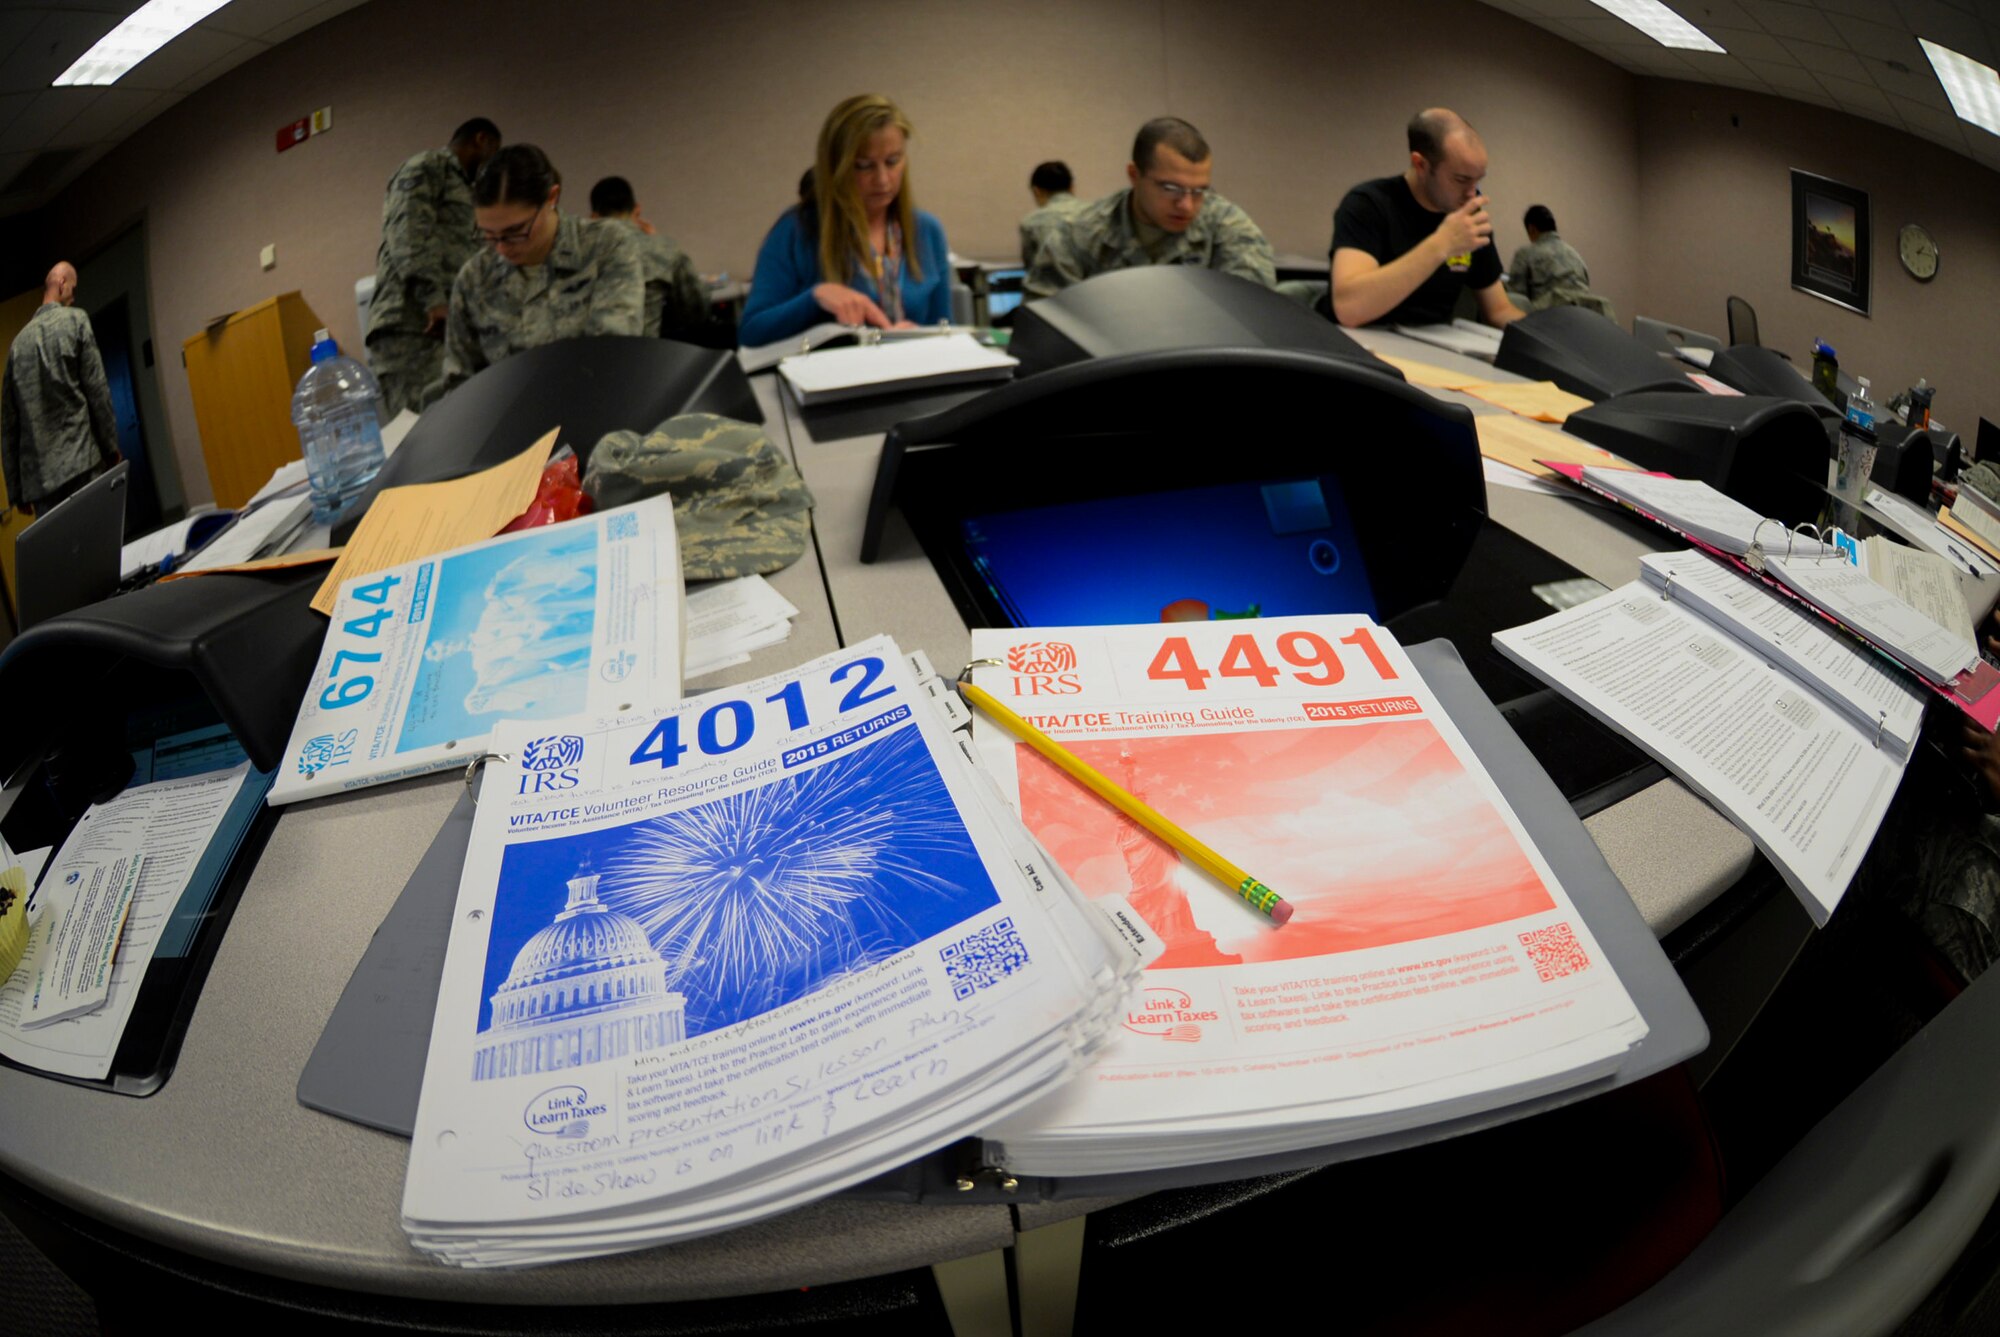 The 509th Bomb Wing legal office offered IRS tax training center volunteers at Whiteman Air Force Base, Mo. Jan. 19, 2016. Trainers used variety of guides to teach volunteers how to properly file tax returns. (U.S. Air Force photo by Senior Airman Sandra Marrero)